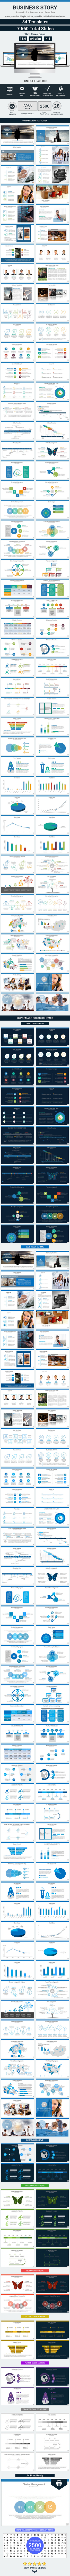 Business Story PowerPoint Presentation Template